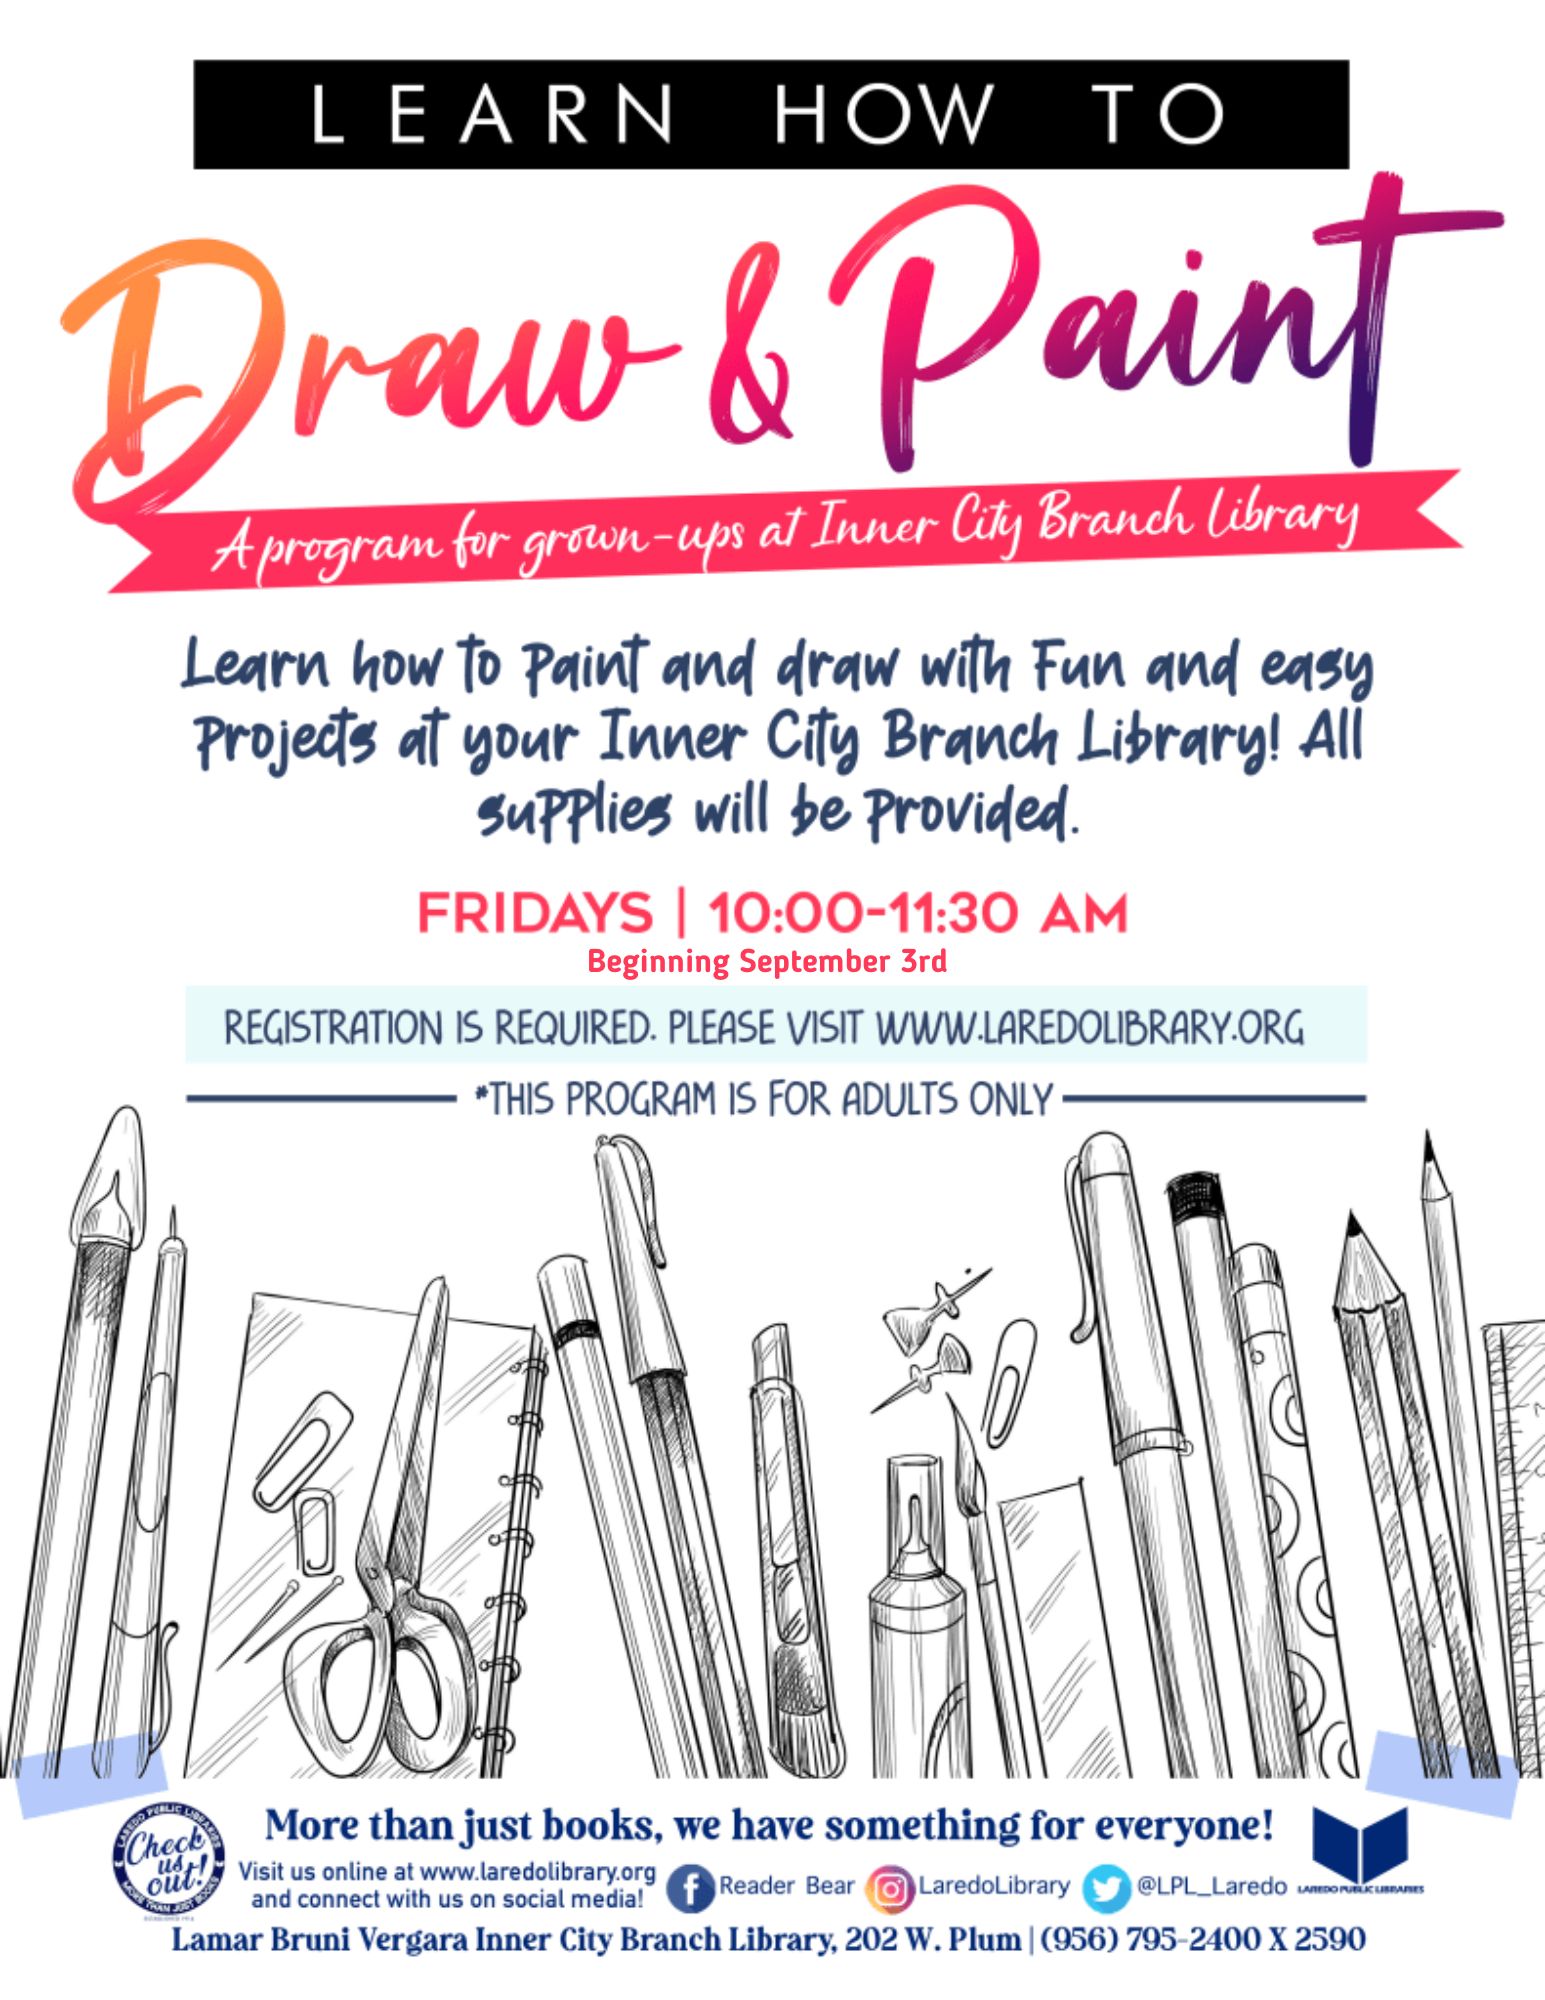 Learn How to Draw & Paint for Grown-ups Registration Begins!